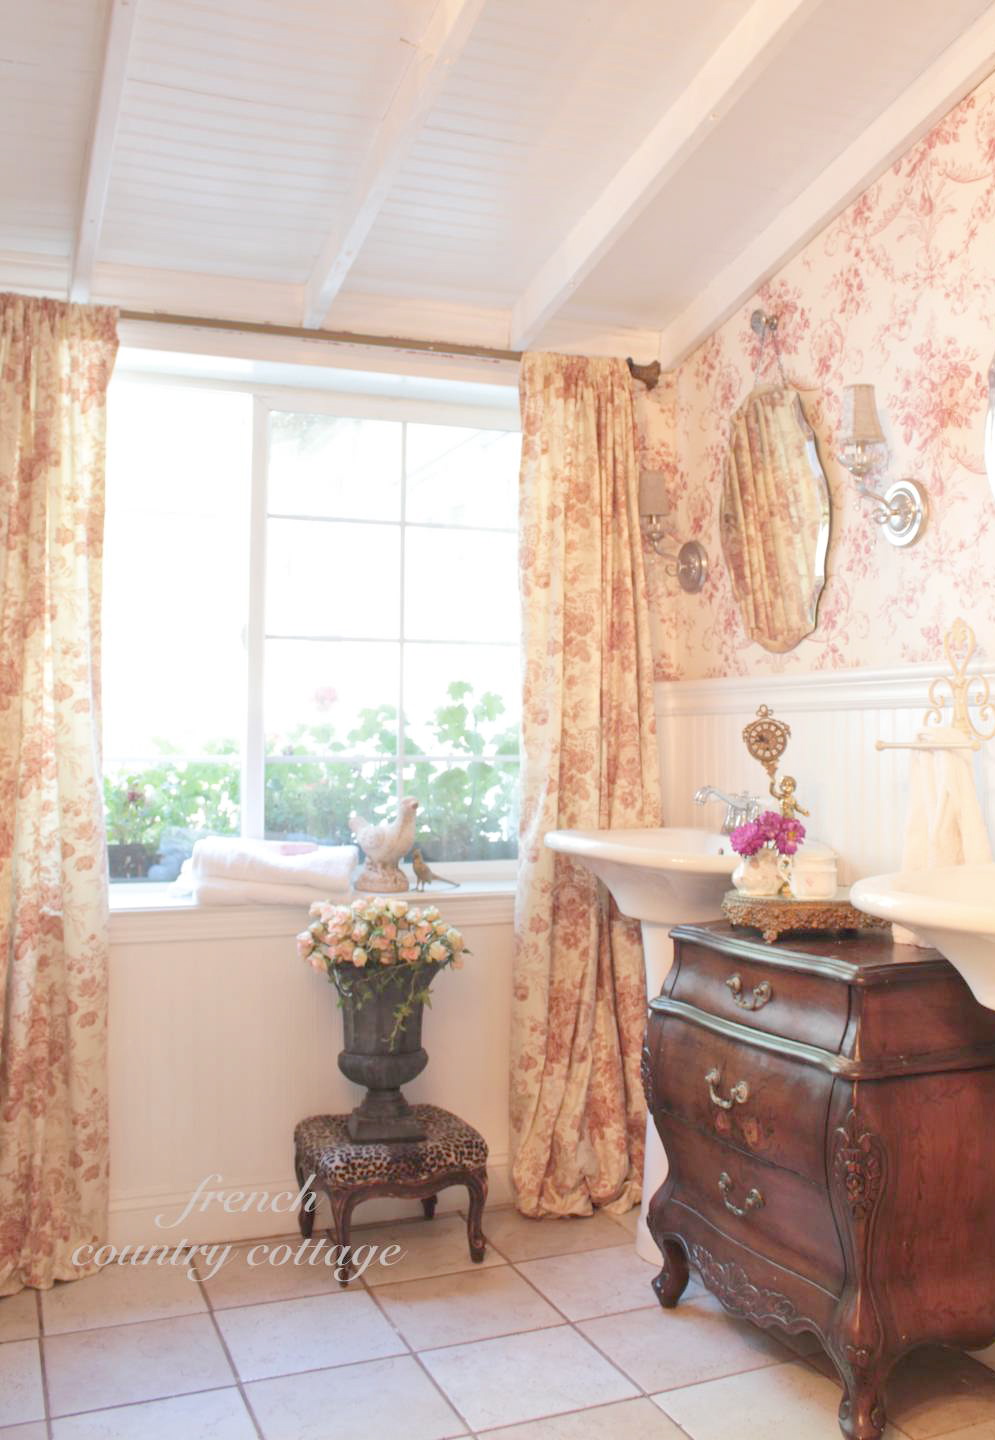 Free Download French Country Cottage French Cottage Toile